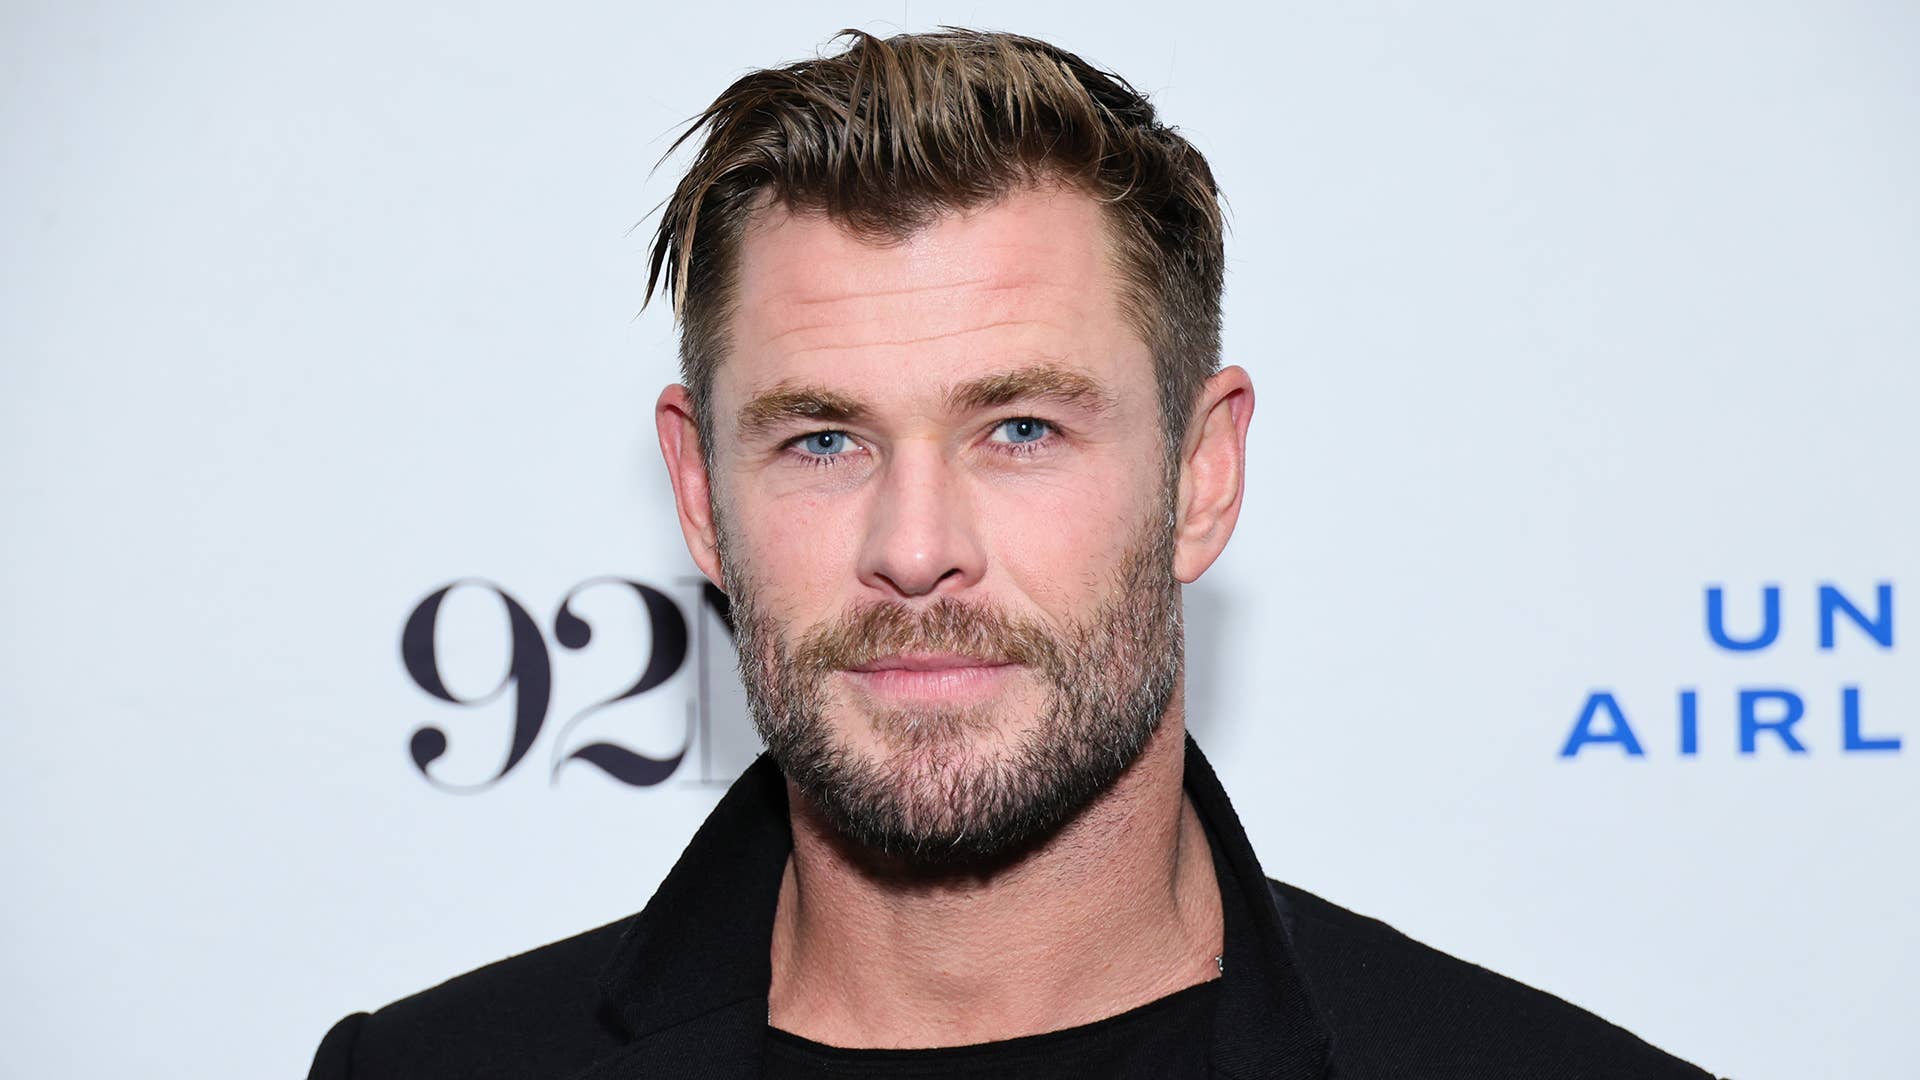 Chris Hemsworth attends National Geographic's "Limitless" Screening And Conversation